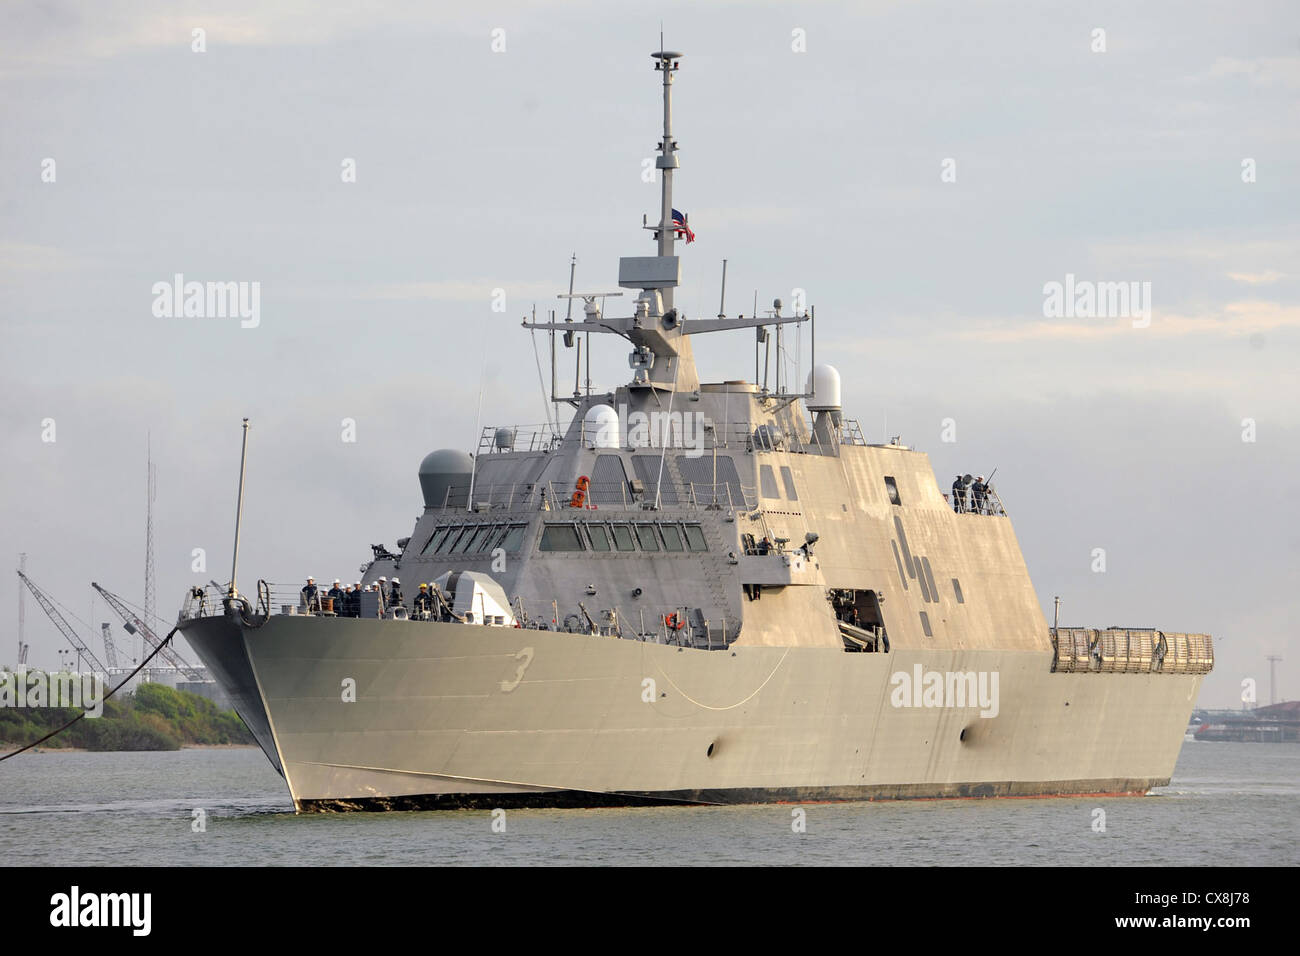 GALVESTON, Texas (Sept. 17, 2012) The Freedom-class littoral combat ship Pre-Commissioning Unit (PCU) Fort Worth (LCS 3) arrives in Galveston, Texas, for her commissioning ceremony Sept. 22. Fort Worth will proceed to her homeport in San Diego following commissioning. Stock Photo